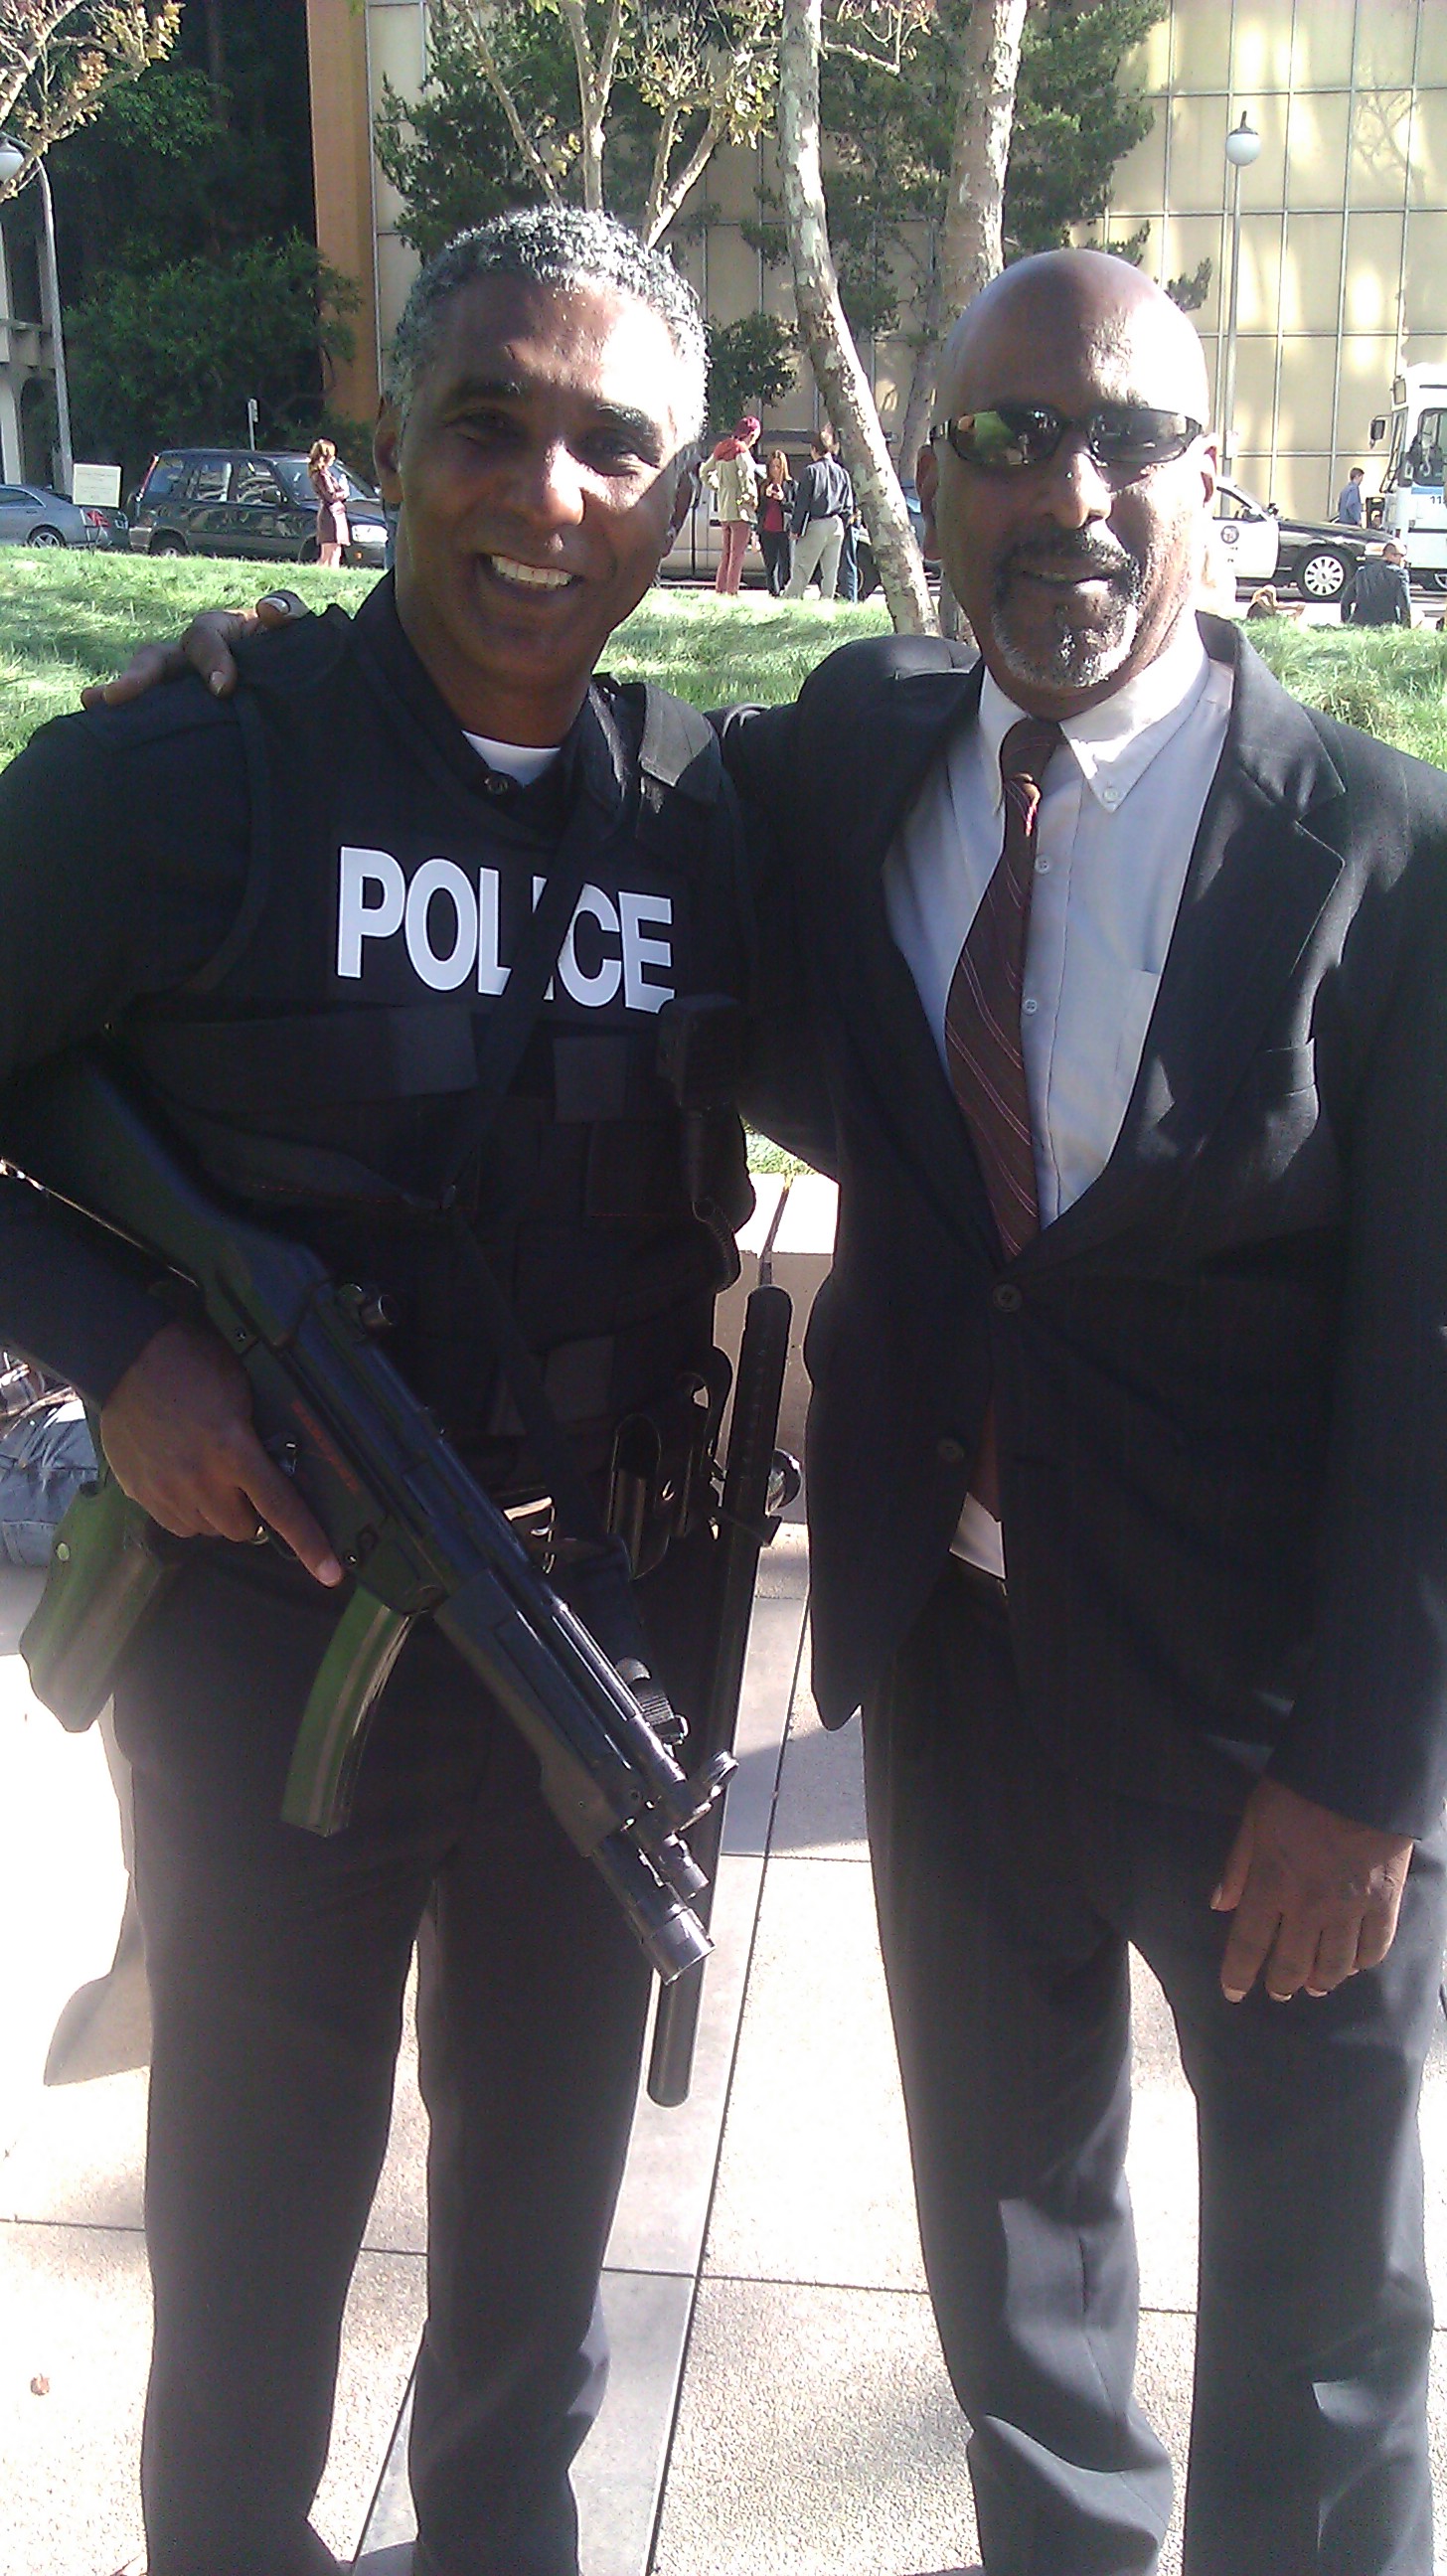 On Set of The After Andray Johnson S.W.A.T. & Christopher Baskerville Buisnessman 10-12-2013